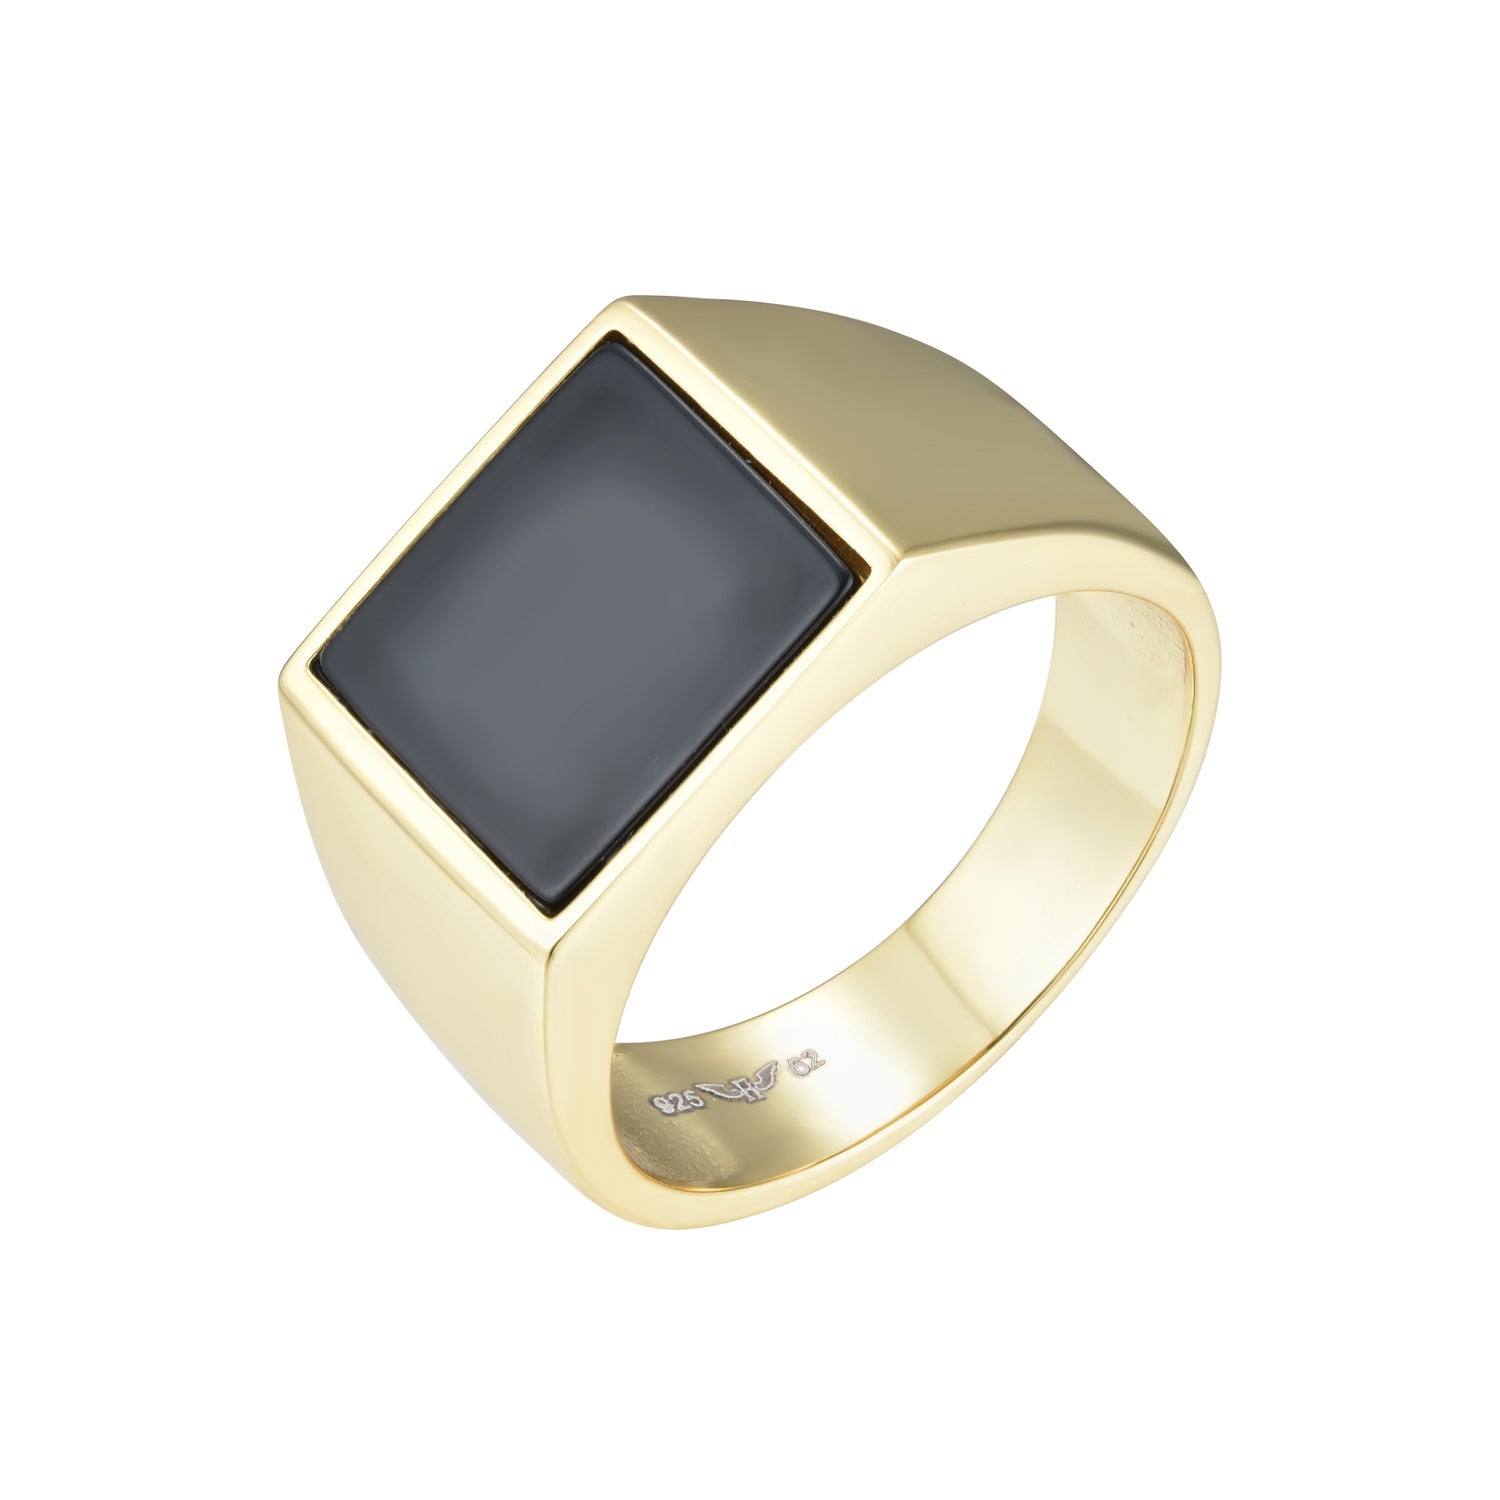 AEON II | Colombus Ring | Black Onyx & 18K Gold Plated 925 Silver